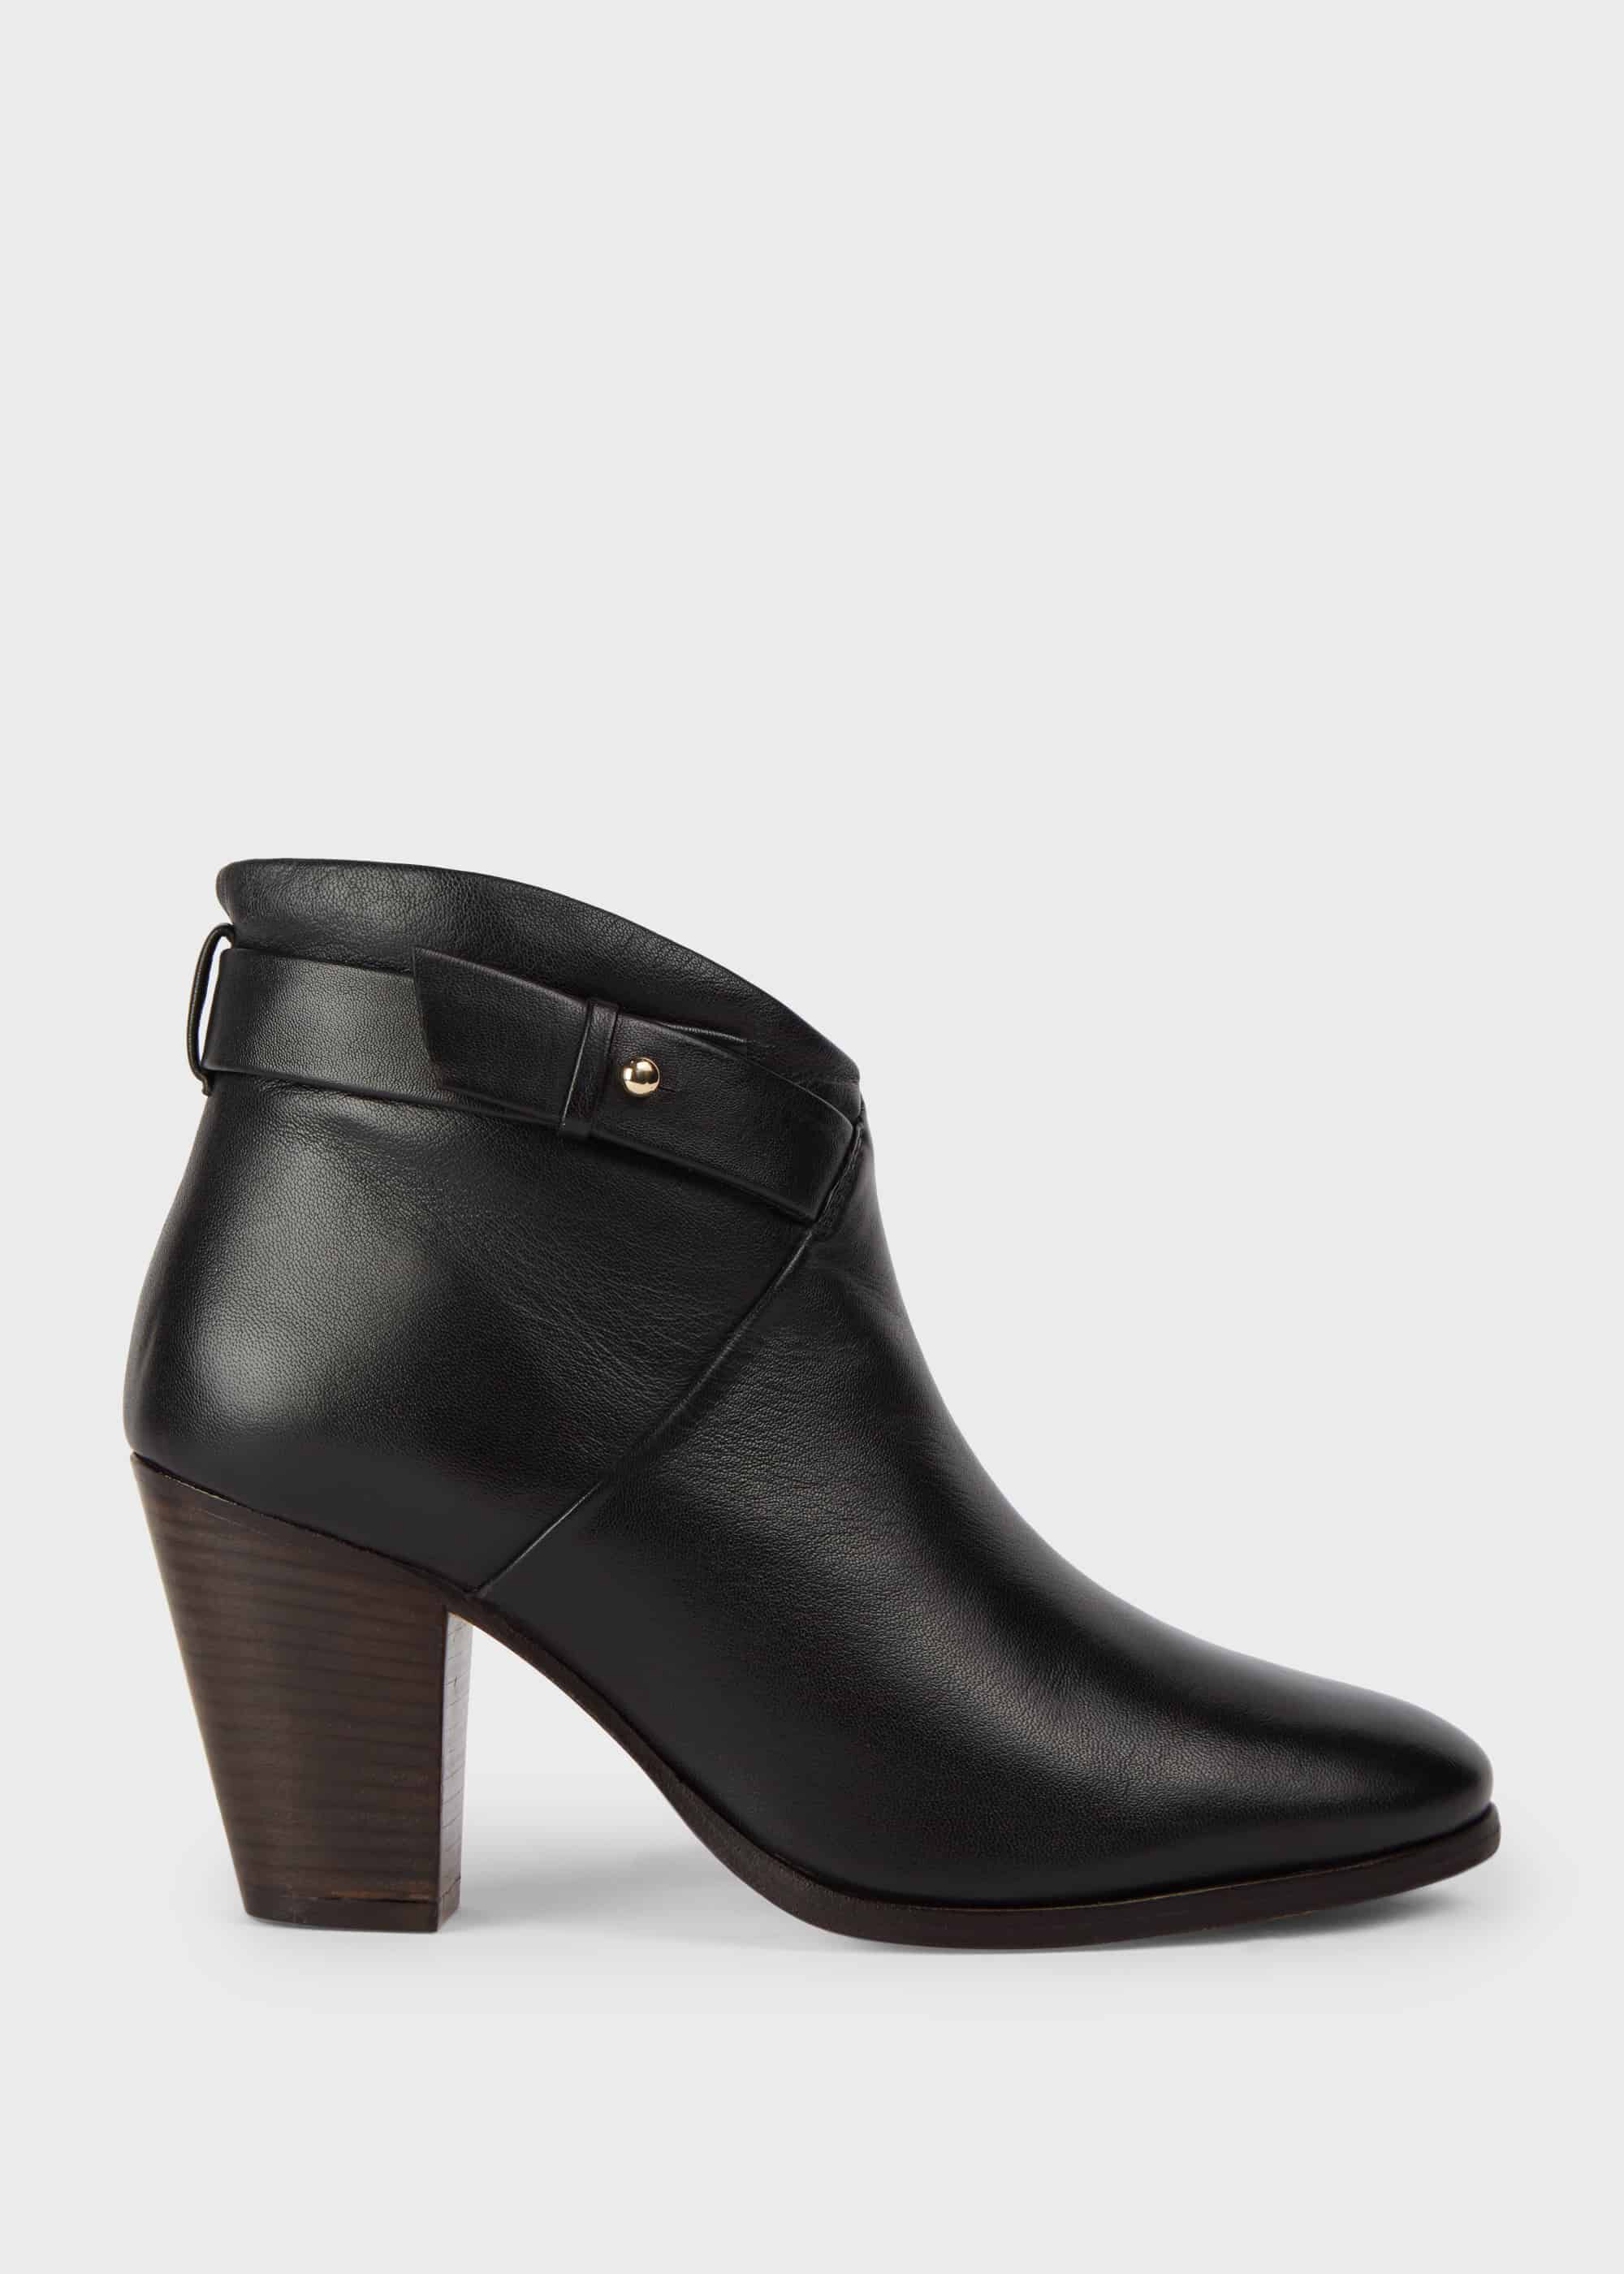 black fabric ankle boots